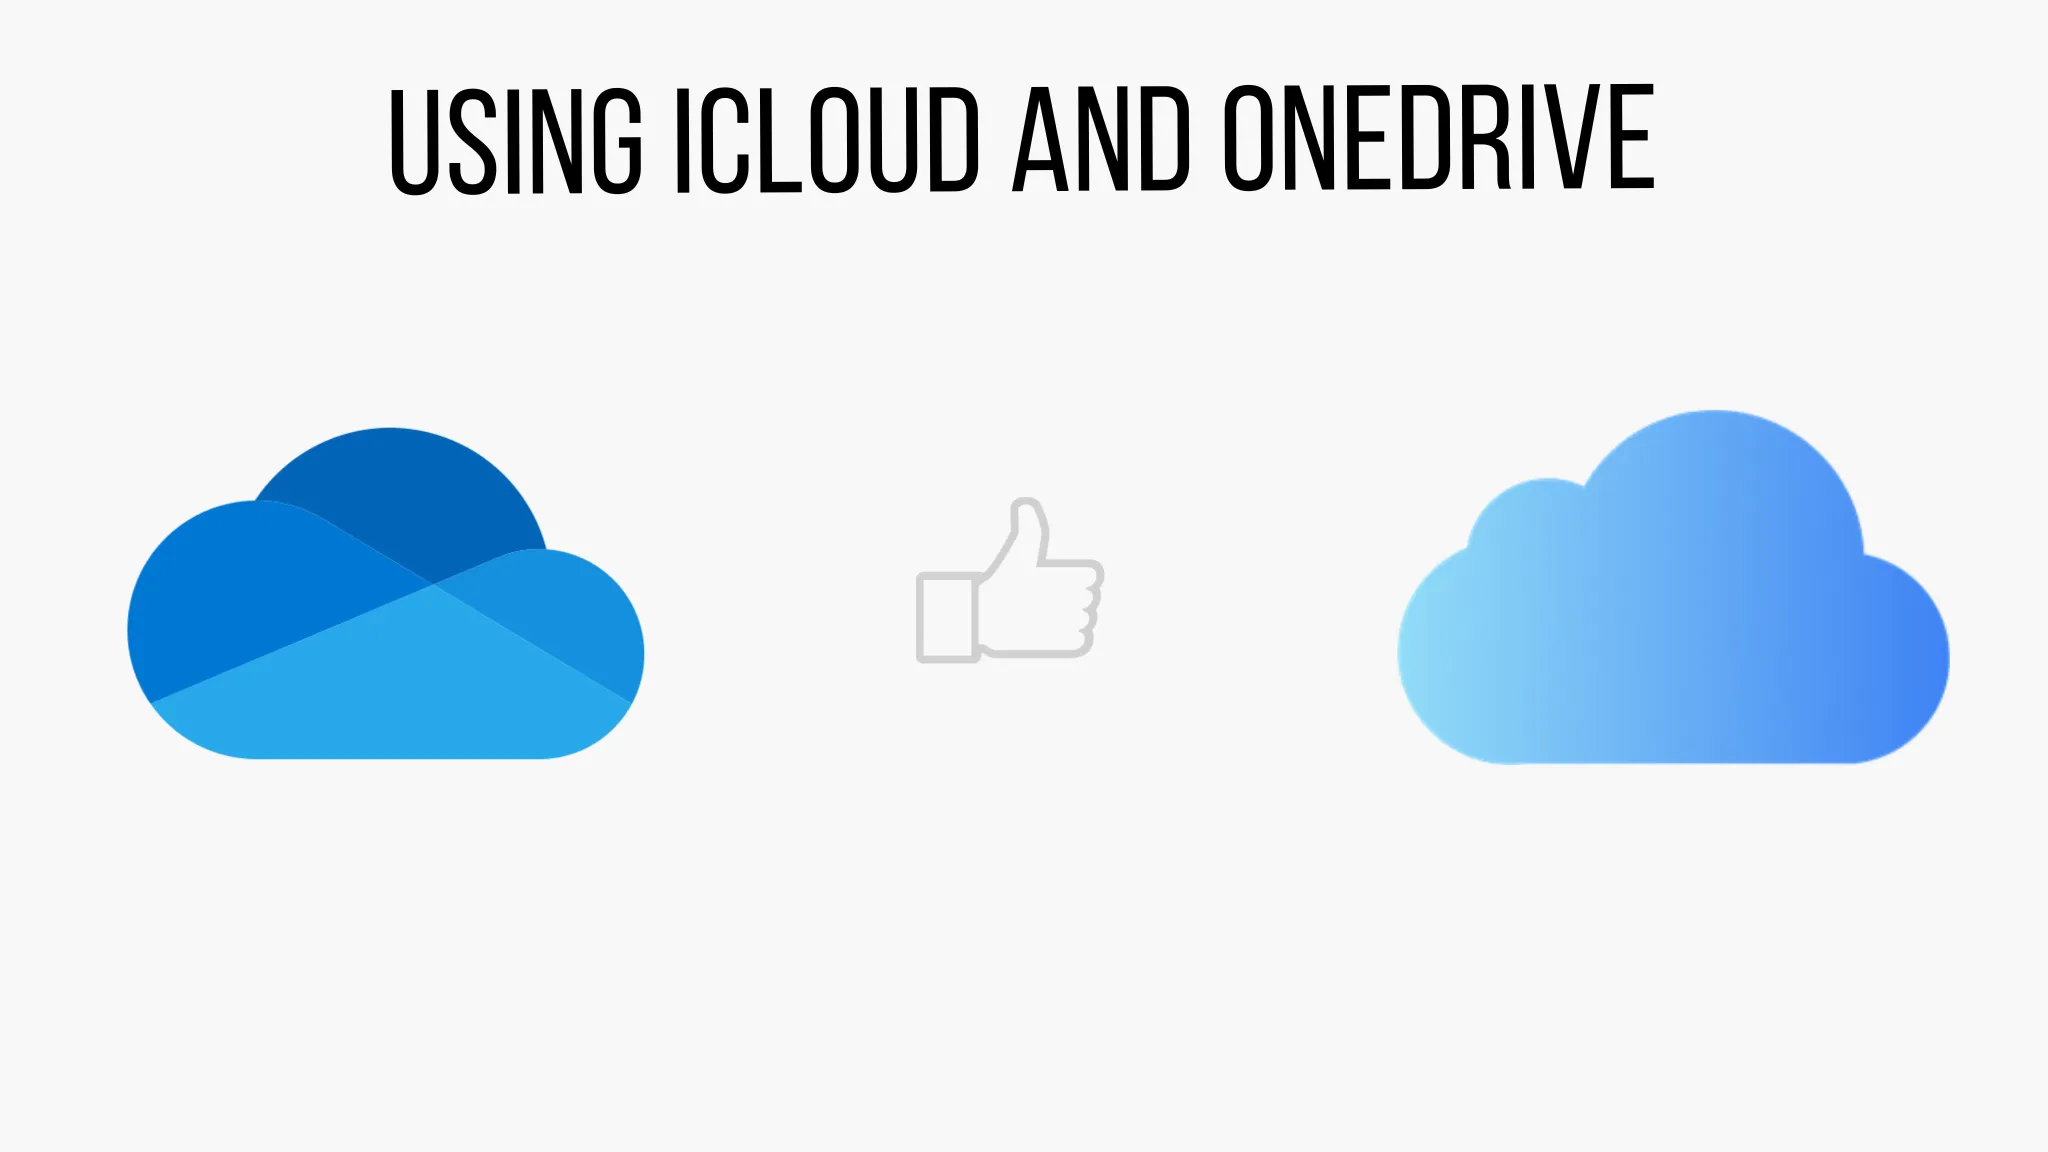 Using iCloud and OneDrive